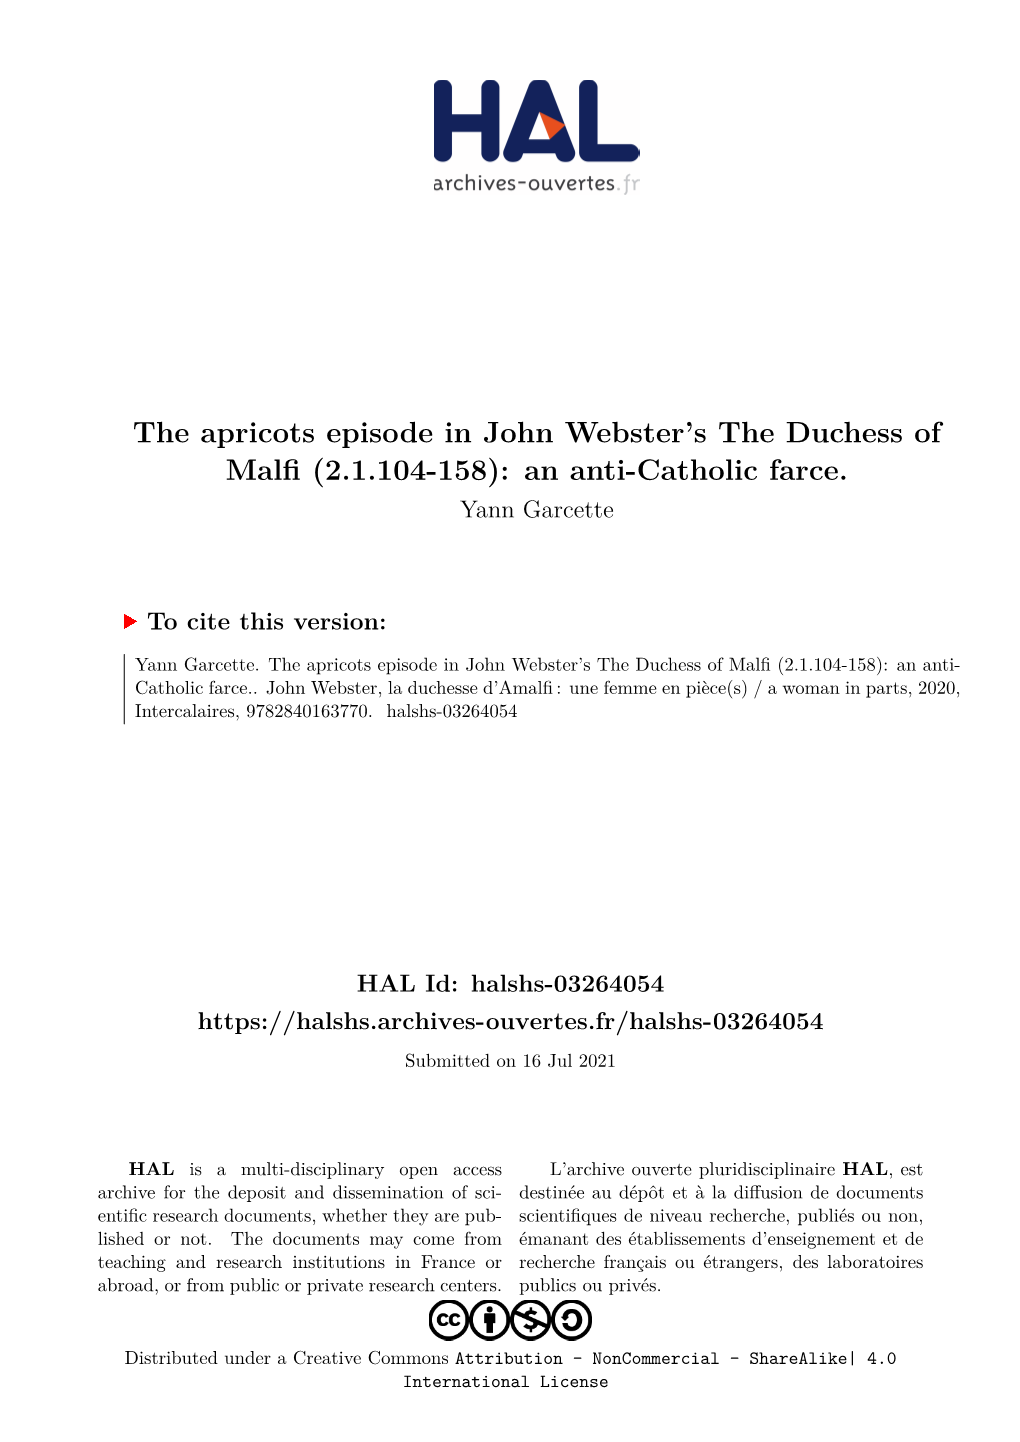 The Apricots Episode in John Webster's the Duchess of Malfi